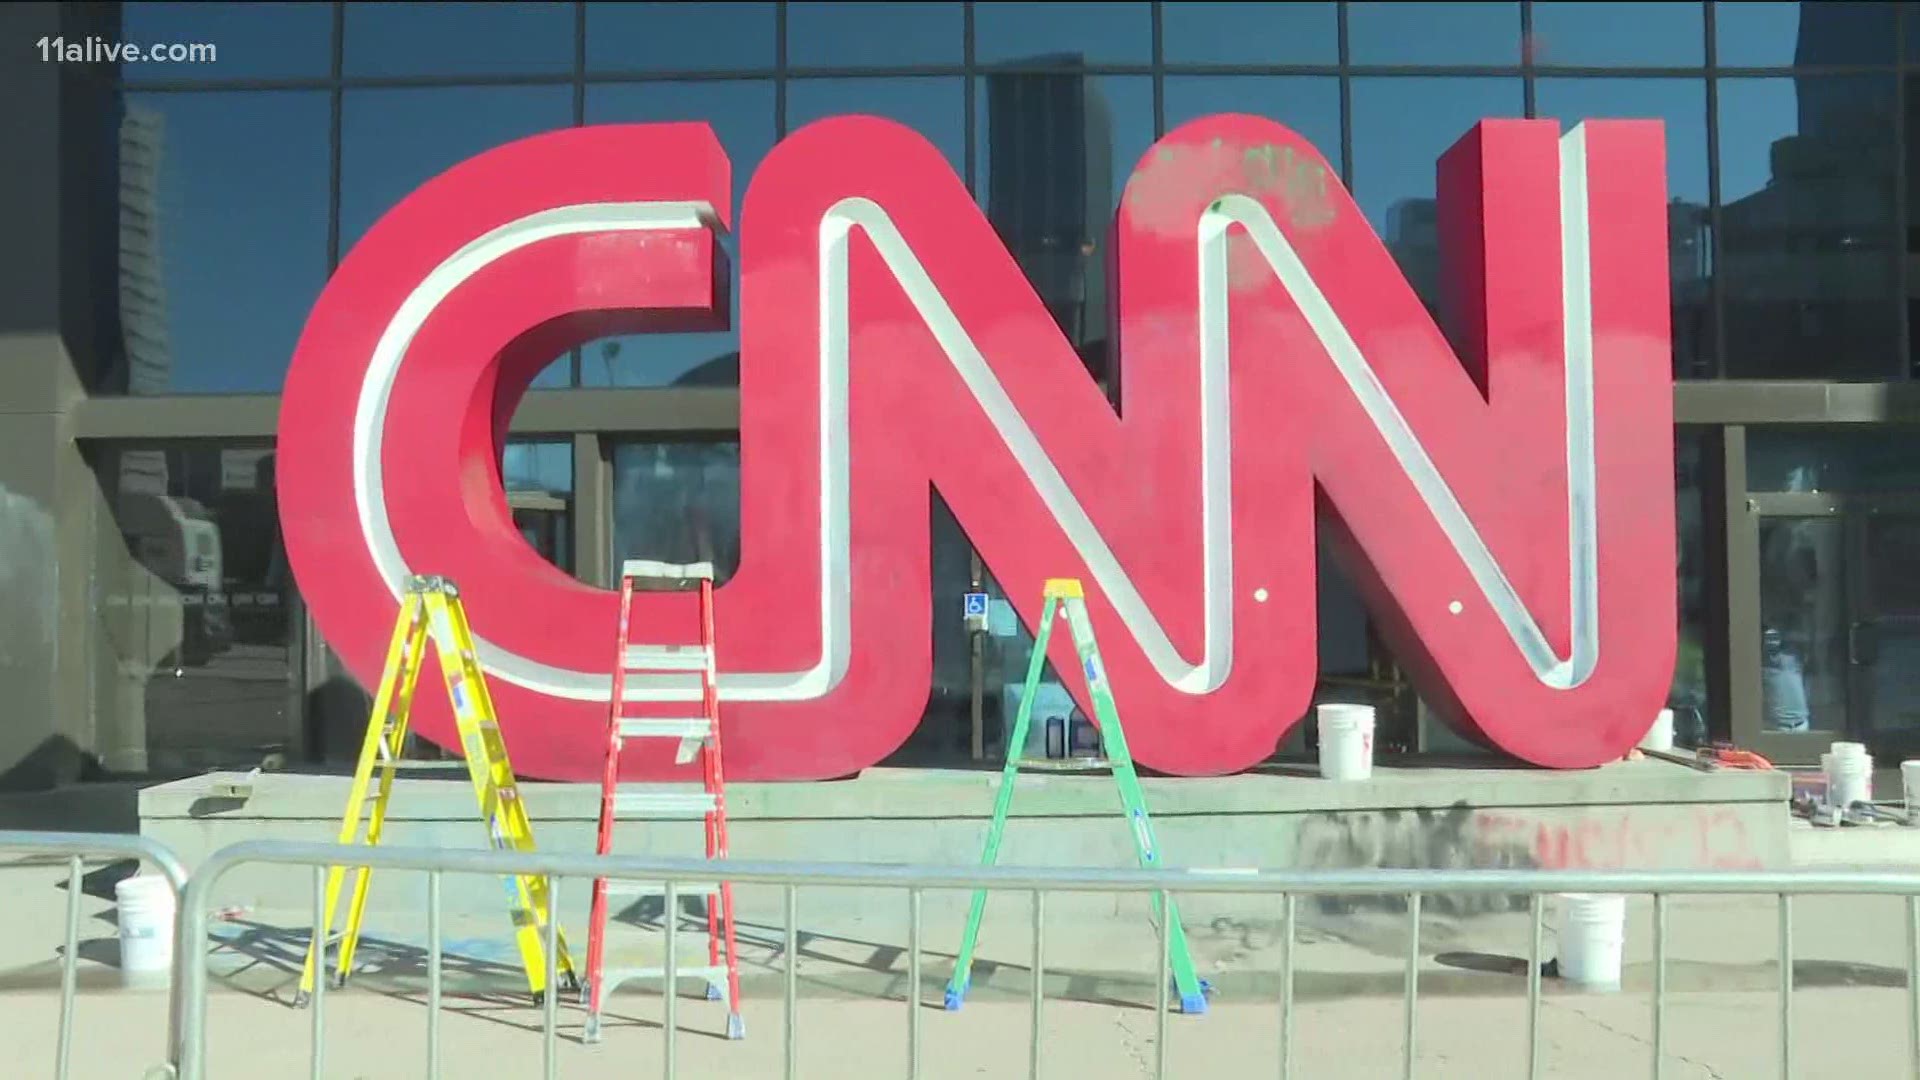 Only hours after Friday night's vandalism and damage, crews were hard at work, repairing the entrance and iconic sign outside the entrance to CNN Center in Atlanta.